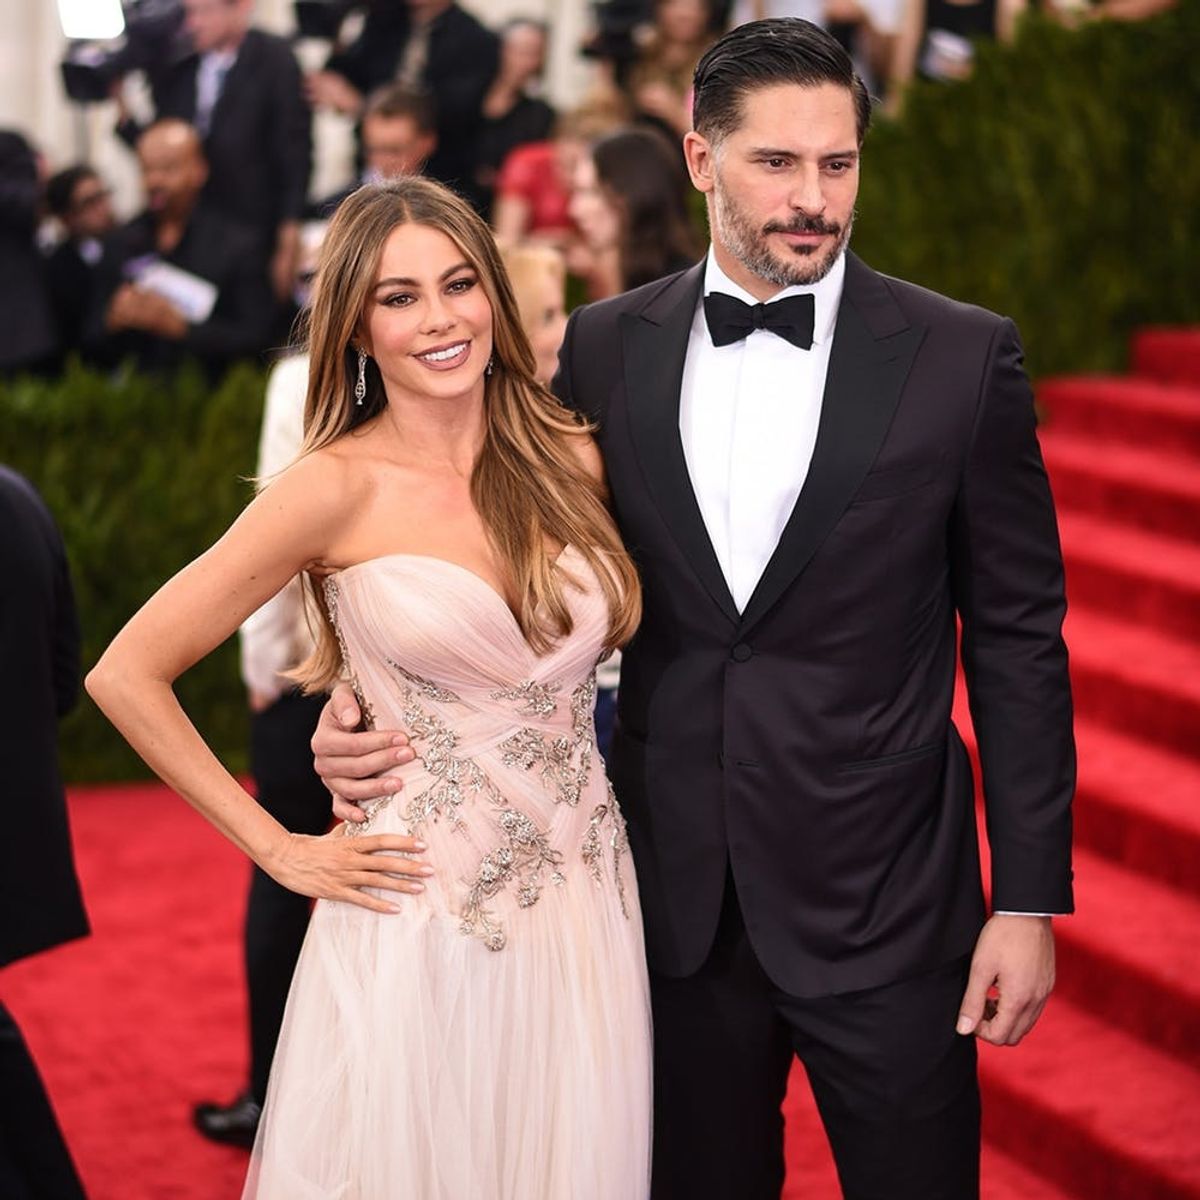 This Is Why Sofia Vergara Won’t Be Having Bridesmaids at Her Wedding